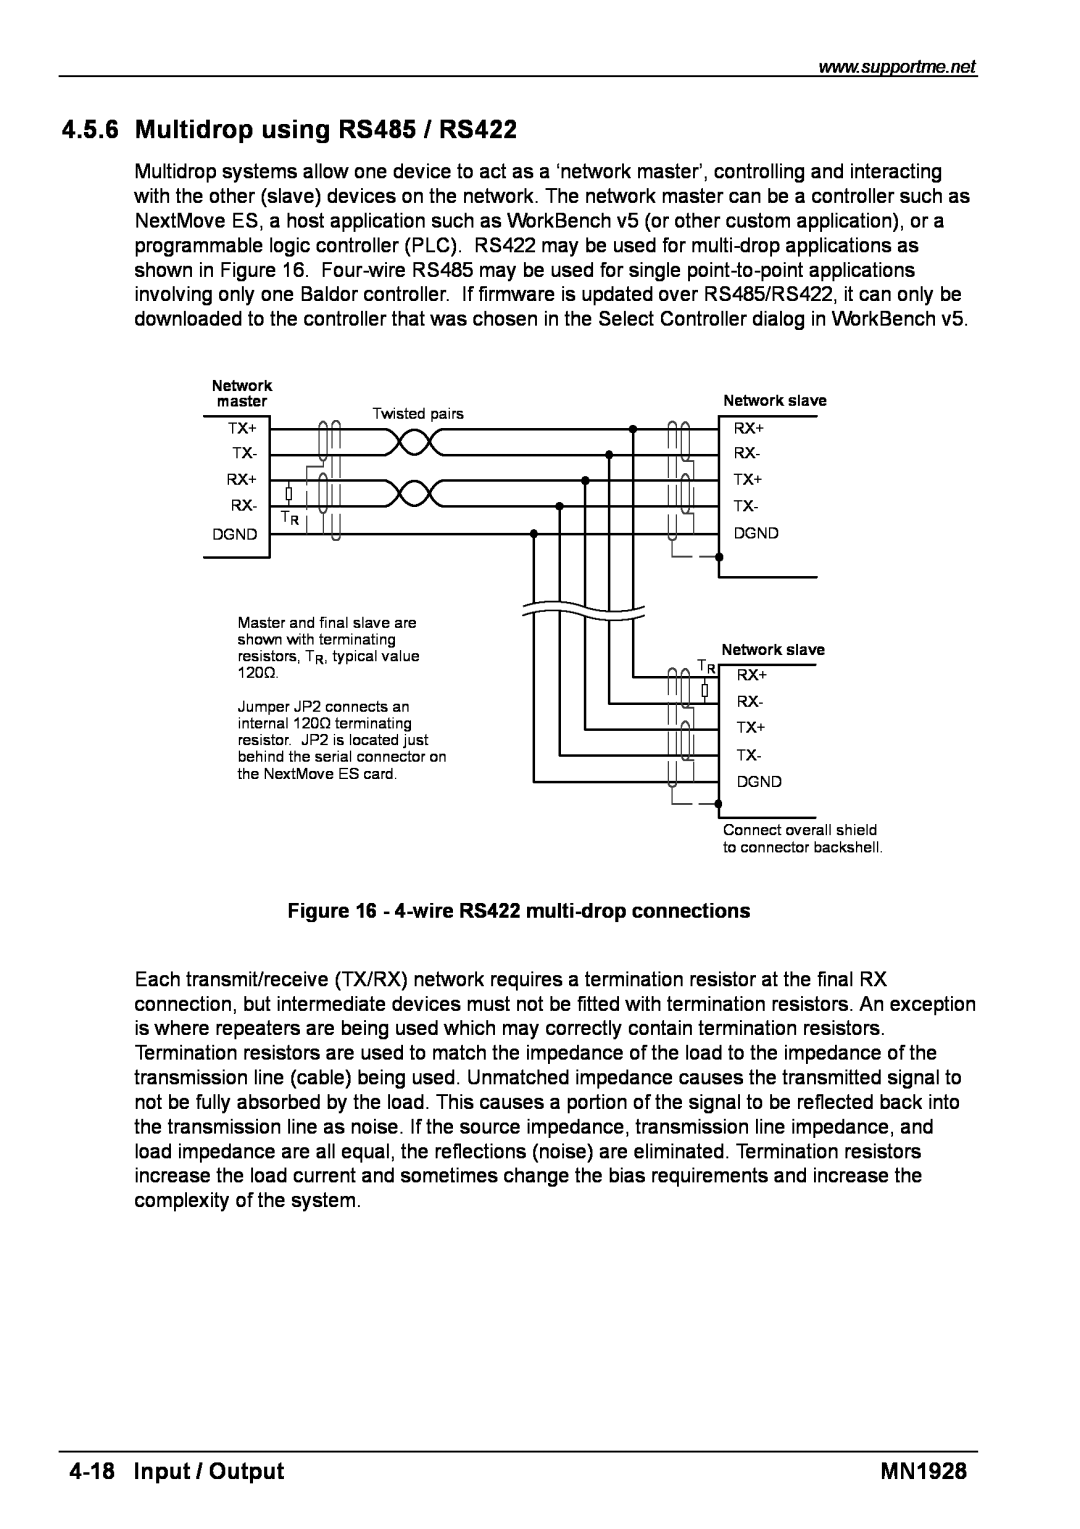 Baldor MN1928 installation manual Multidrop using RS485 / RS422, Input / Output, 4-wire RS422 multi-drop connections 